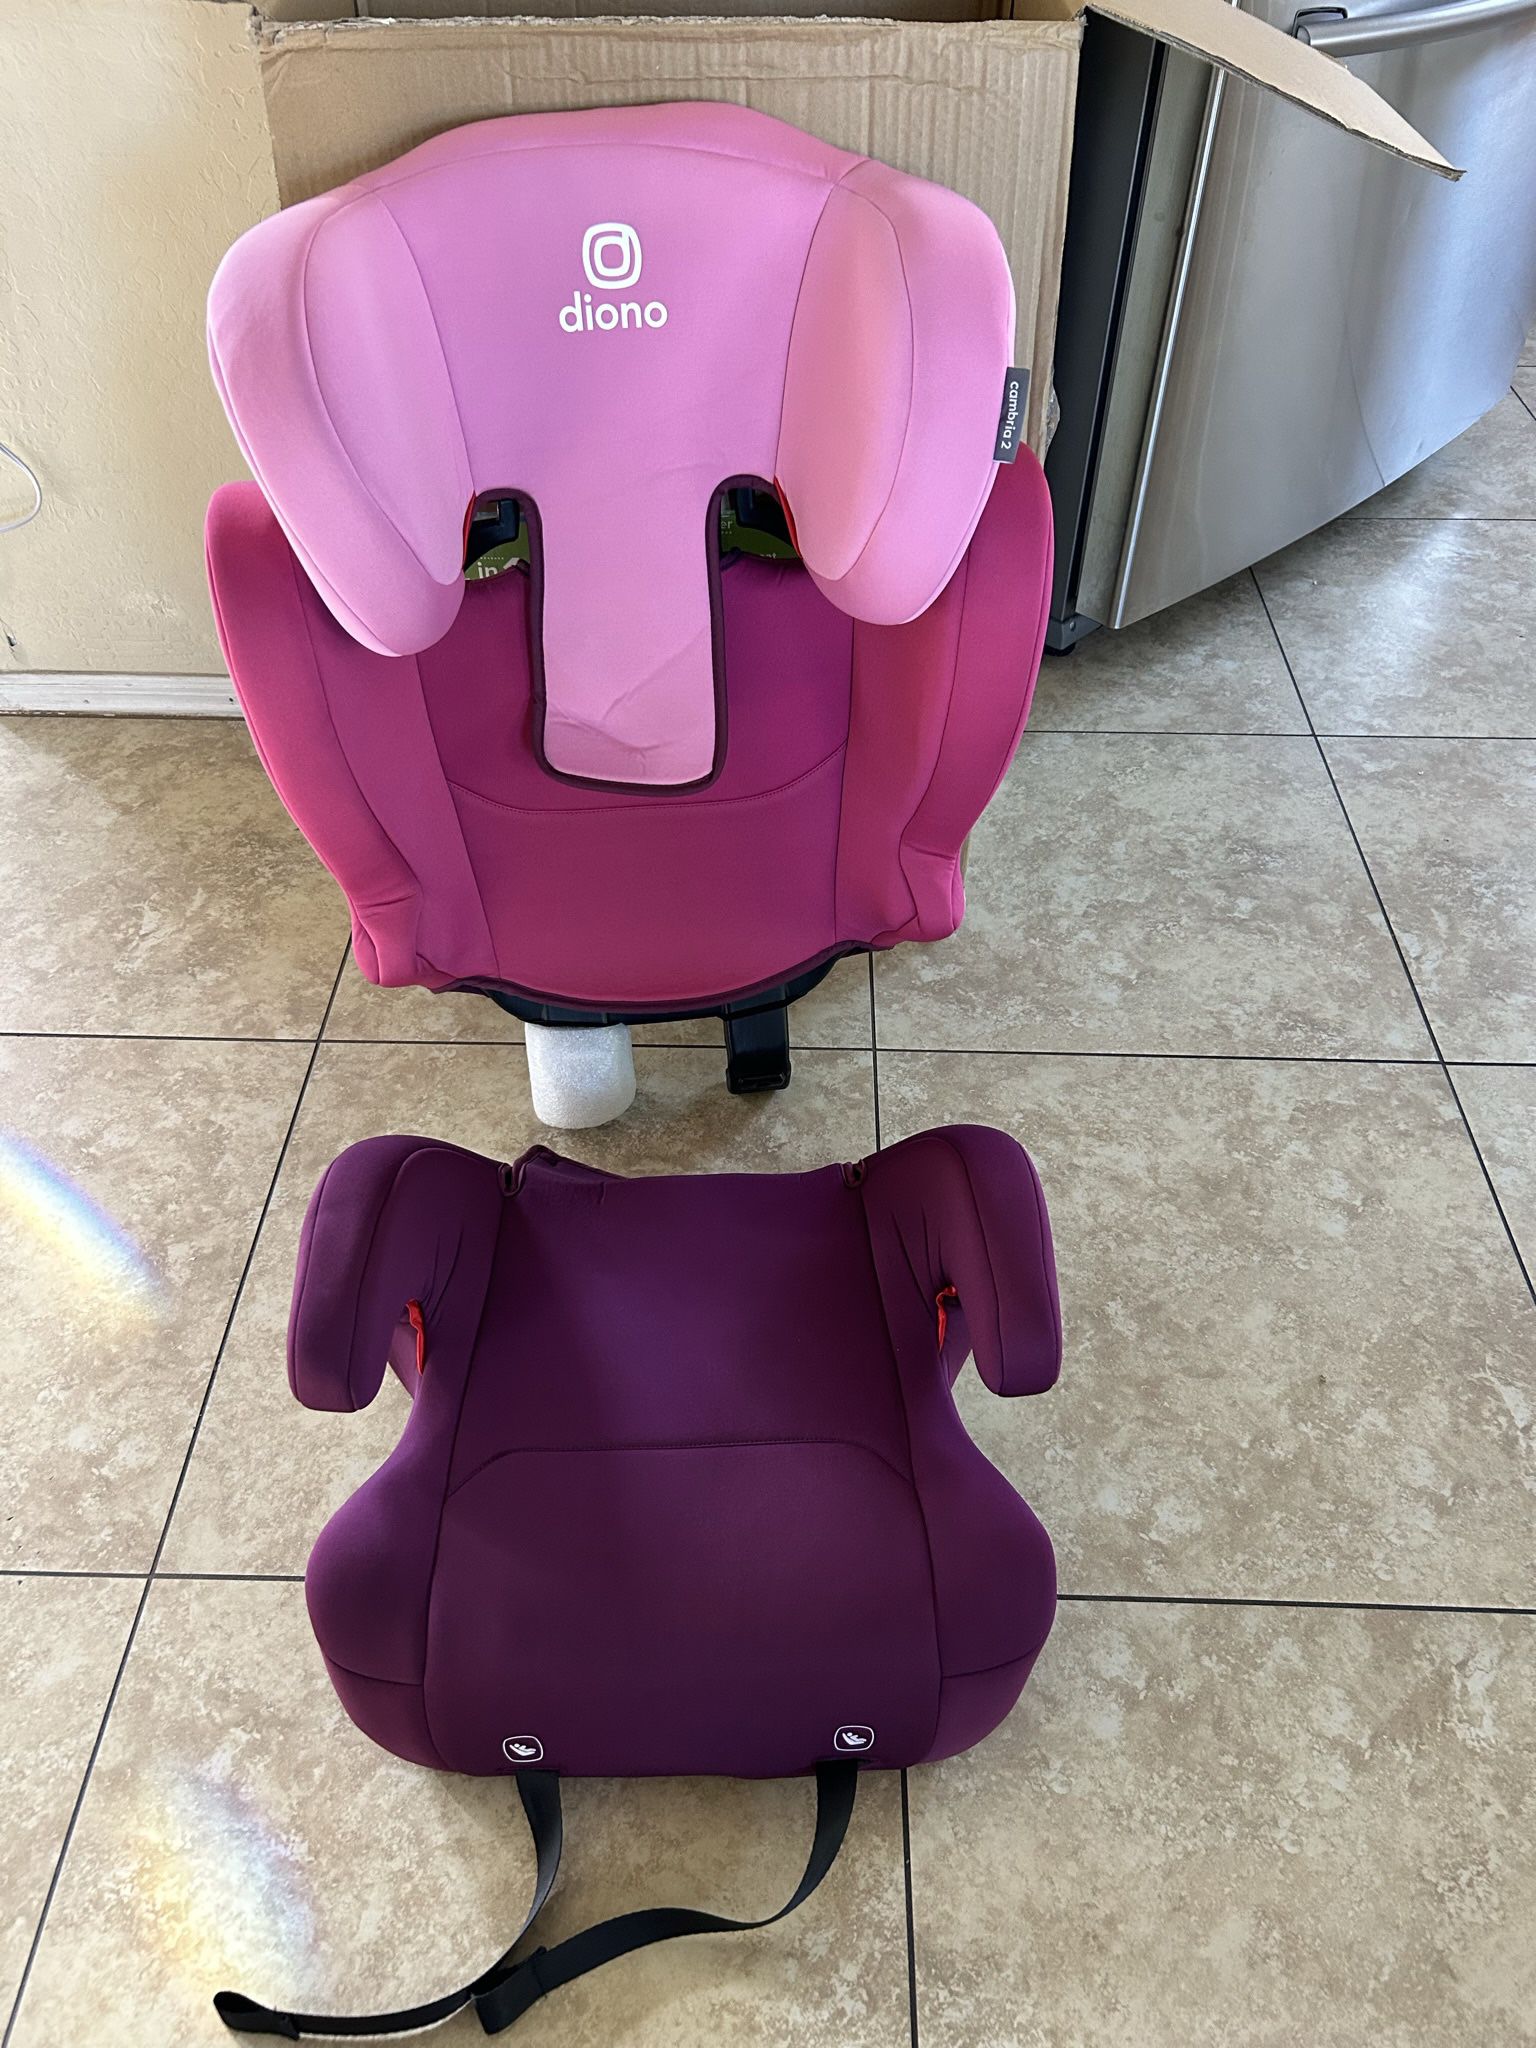 Diono Cambria 2 XL, Dual Latch Connectors, 2-in-1 Belt Positioning Booster Seat, High-Back to Backless Booster with Space and Room to Grow, 8 Years 1 